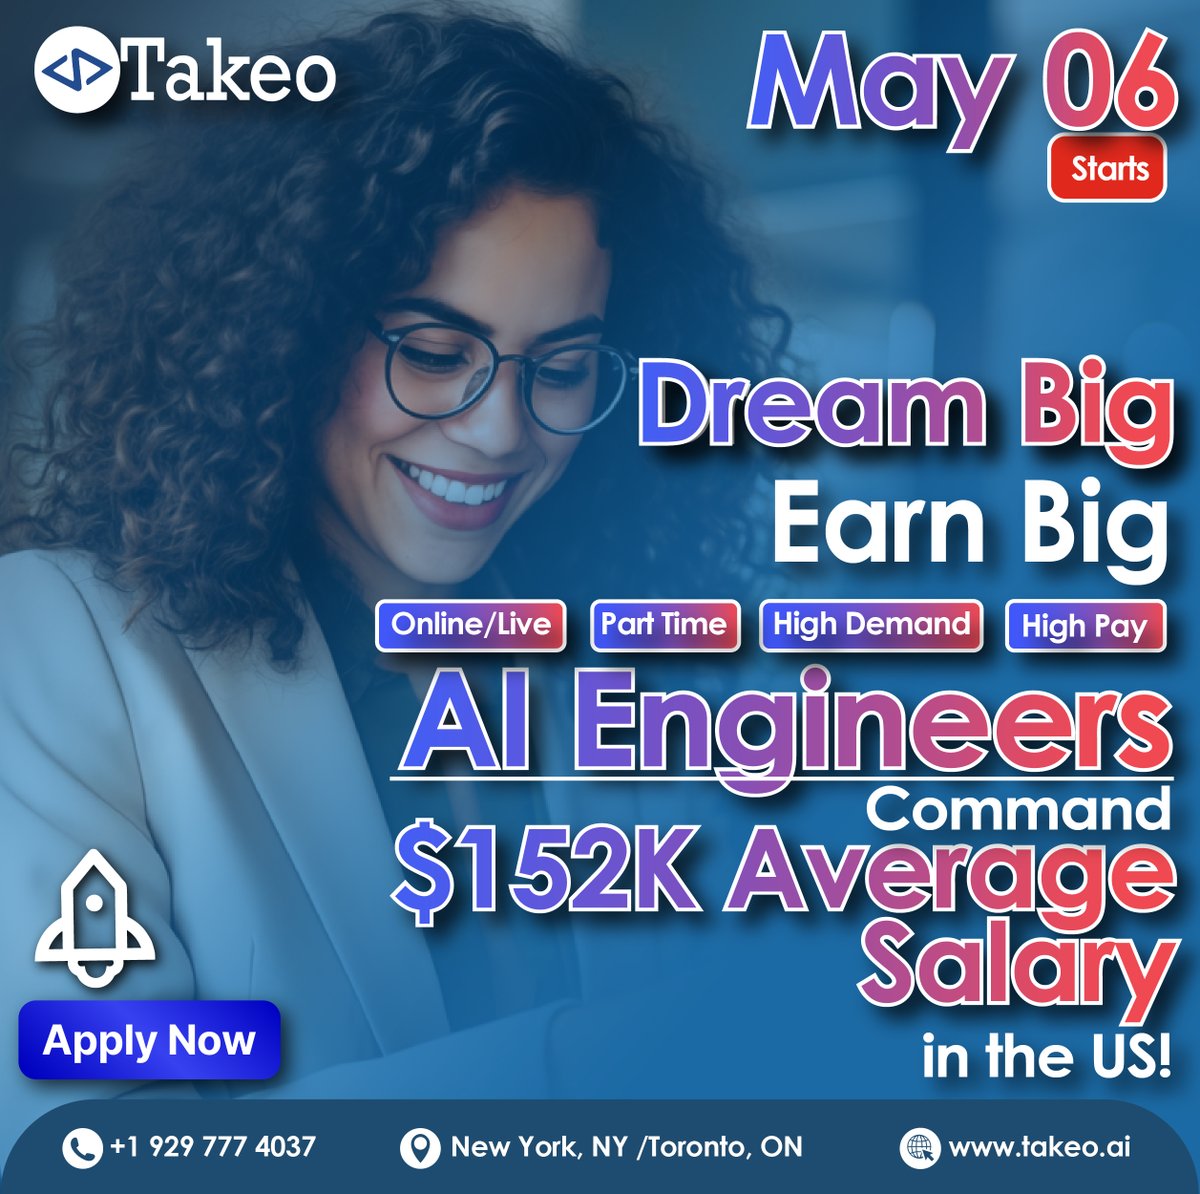 Join our 𝐆𝐞𝐧𝐞𝐫𝐚𝐭𝐢𝐯𝐞 𝐀𝐈 𝐁𝐨𝐨𝐭𝐜𝐚𝐦𝐩 and position yourself for success in this booming industry.  
𝐓𝐨 𝐀𝐩𝐩𝐥𝐲: takeo.ai/generative-ai-…

#TakeoAI #NewFrontiers #AIBootcamp #TechPioneers #InnovateWithAI #FutureTechLeaders #CraftYourFuture #AIInnovation